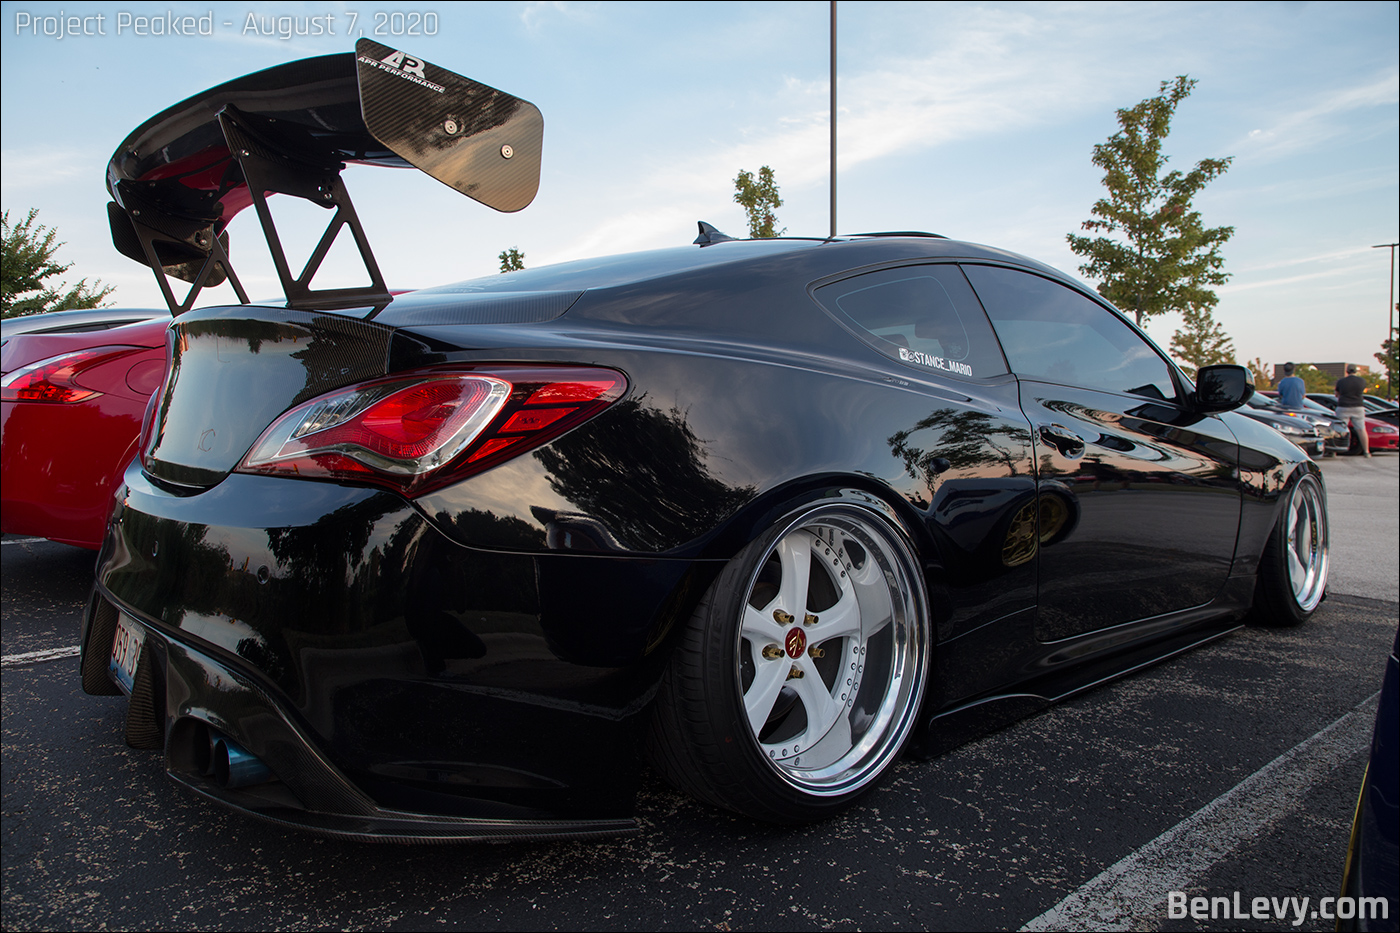 CF APR wing on a CF trunk of a Hyundai Genesis Coupe - BenLevy.com